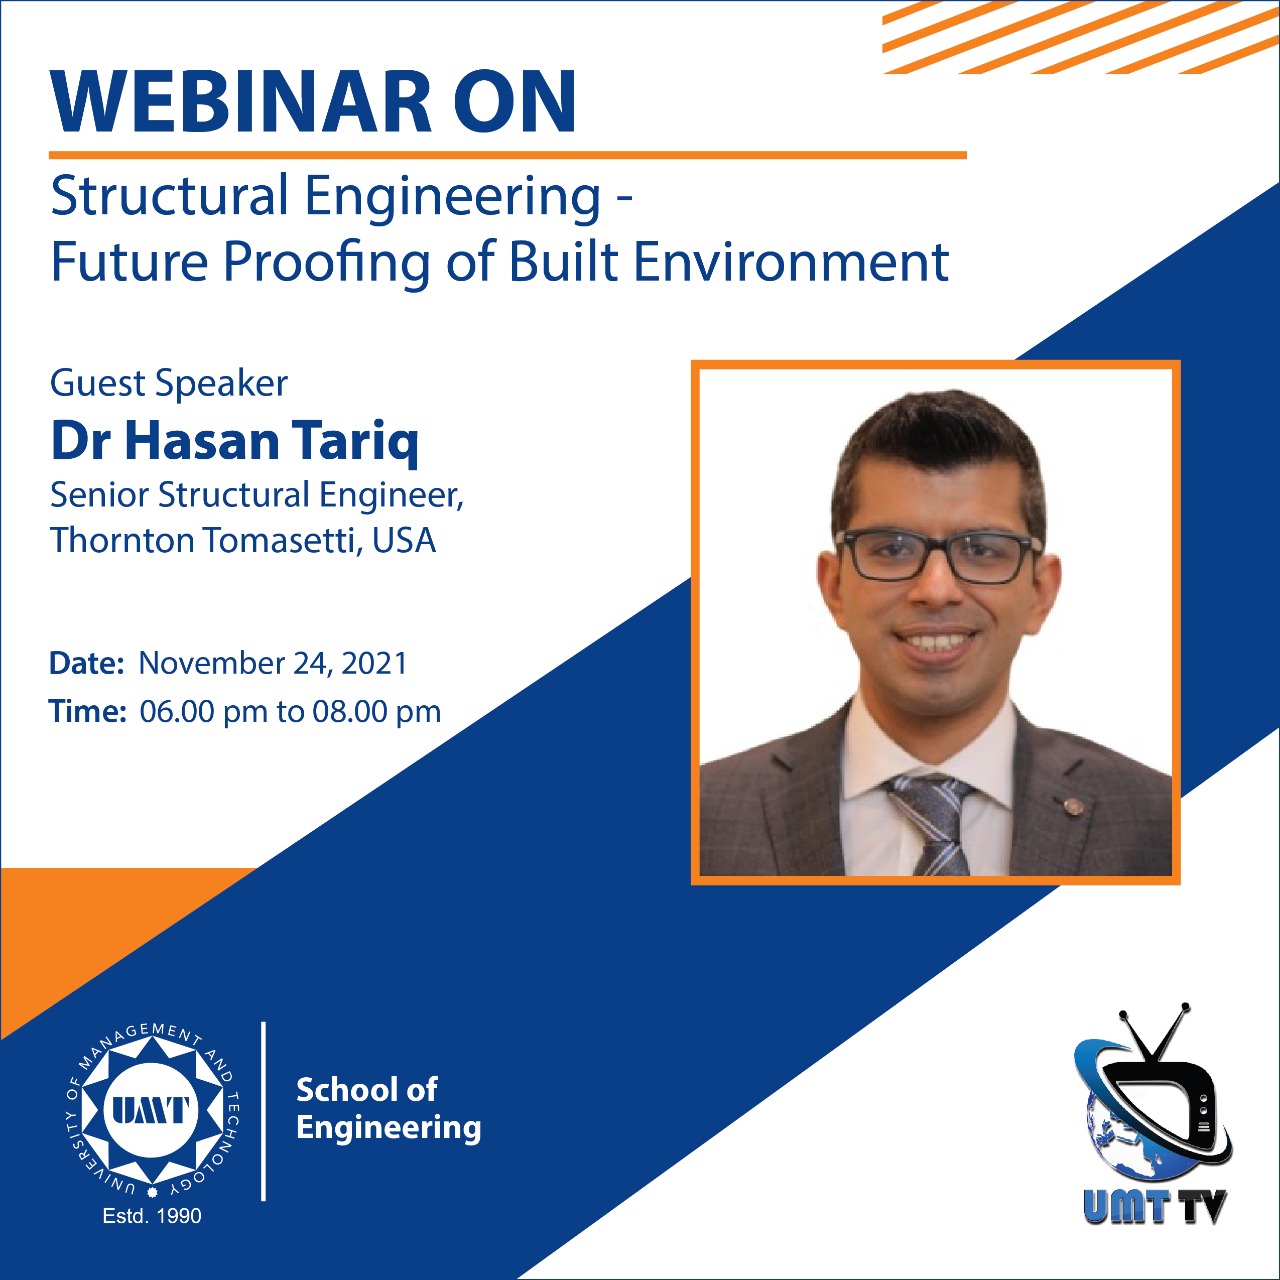 Webinar on Structure Engineering - Future proofing of Built Environment